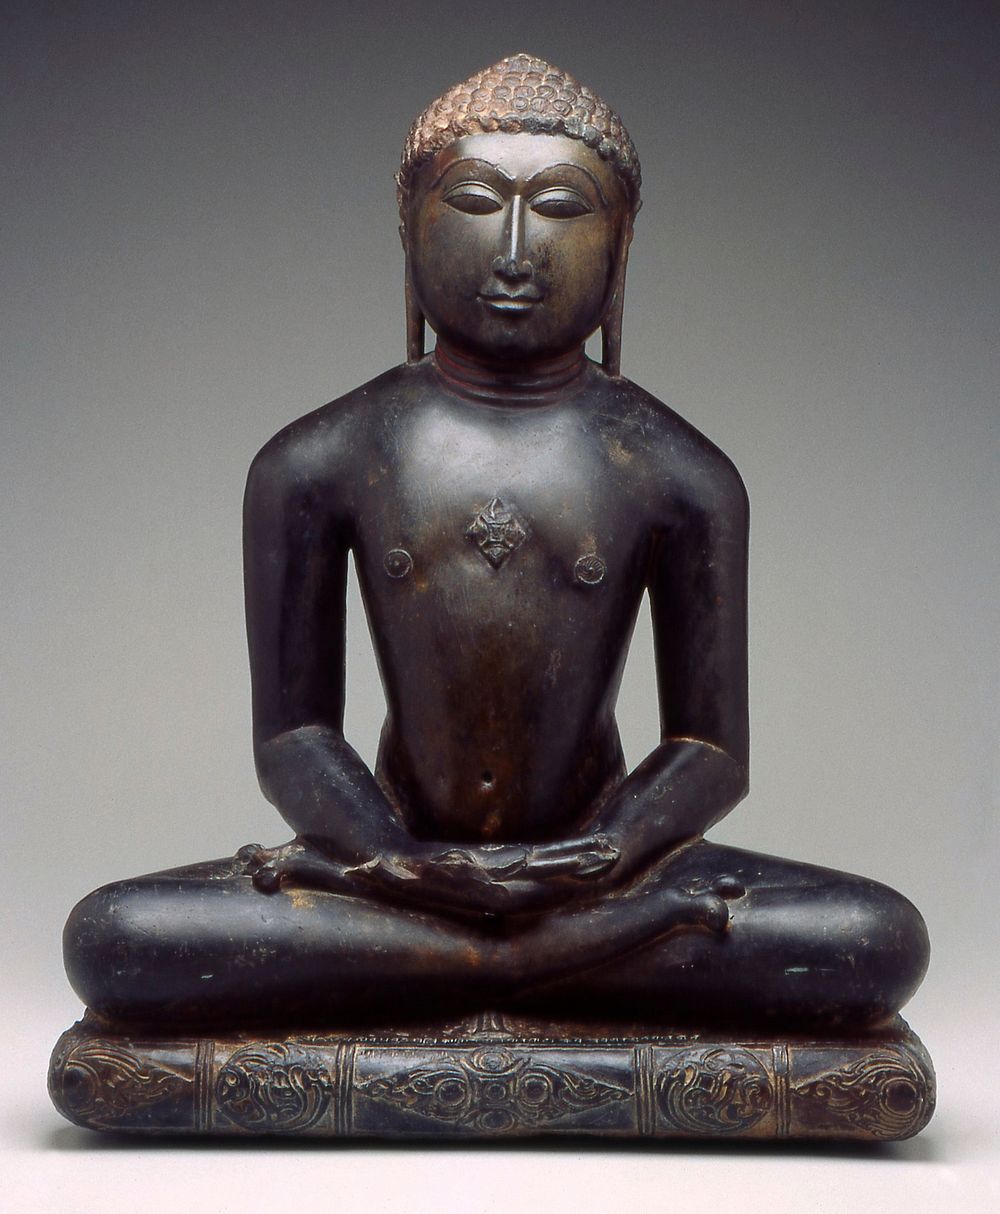 figure seated in dhyanasana with hands in lap; cushion below figure carved with foliate sprays and central quatrefoil…